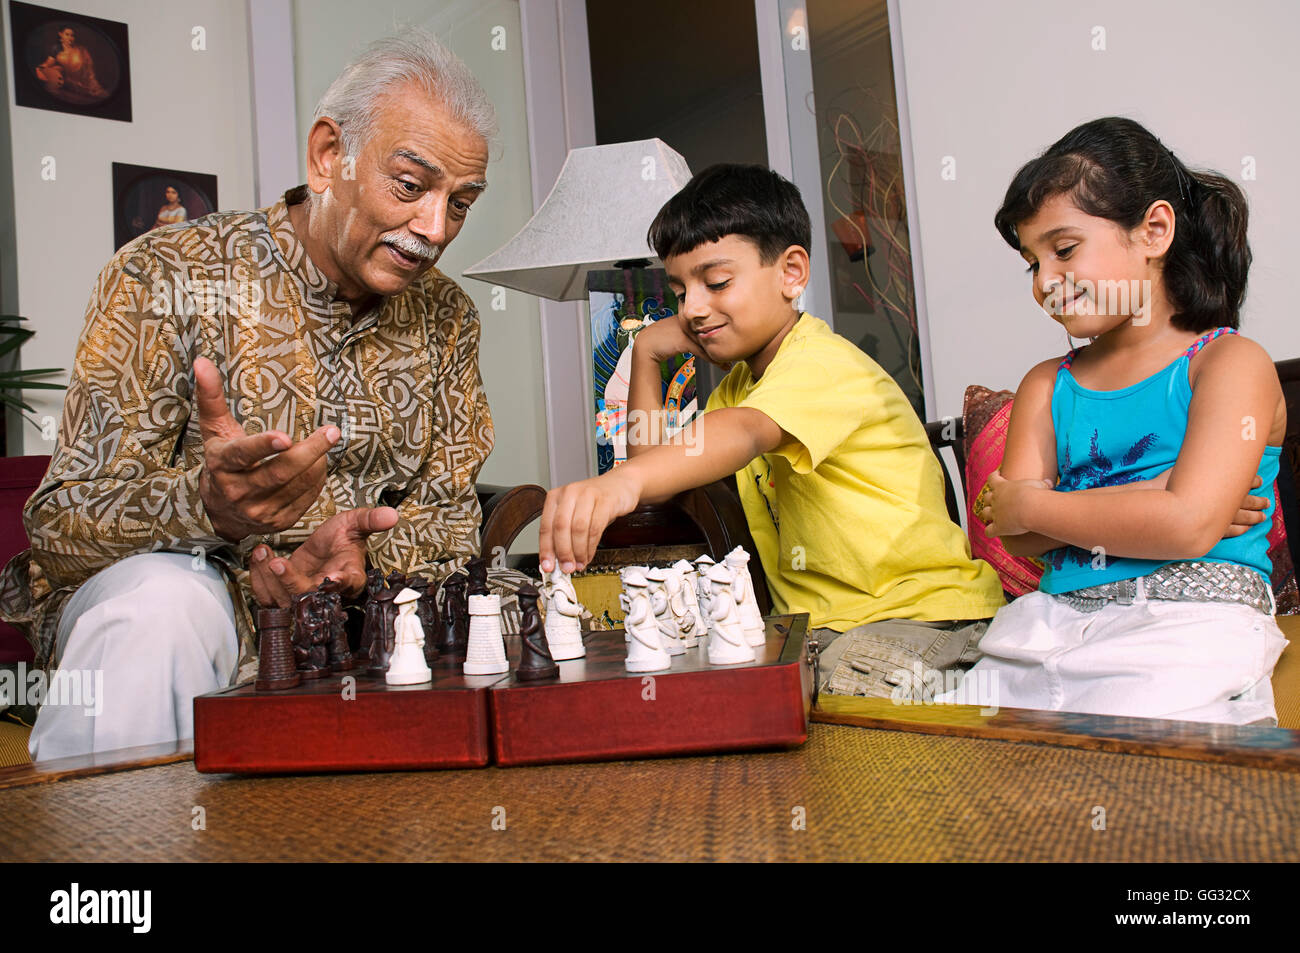 Grandfather playing with grandchildren Stock Photo